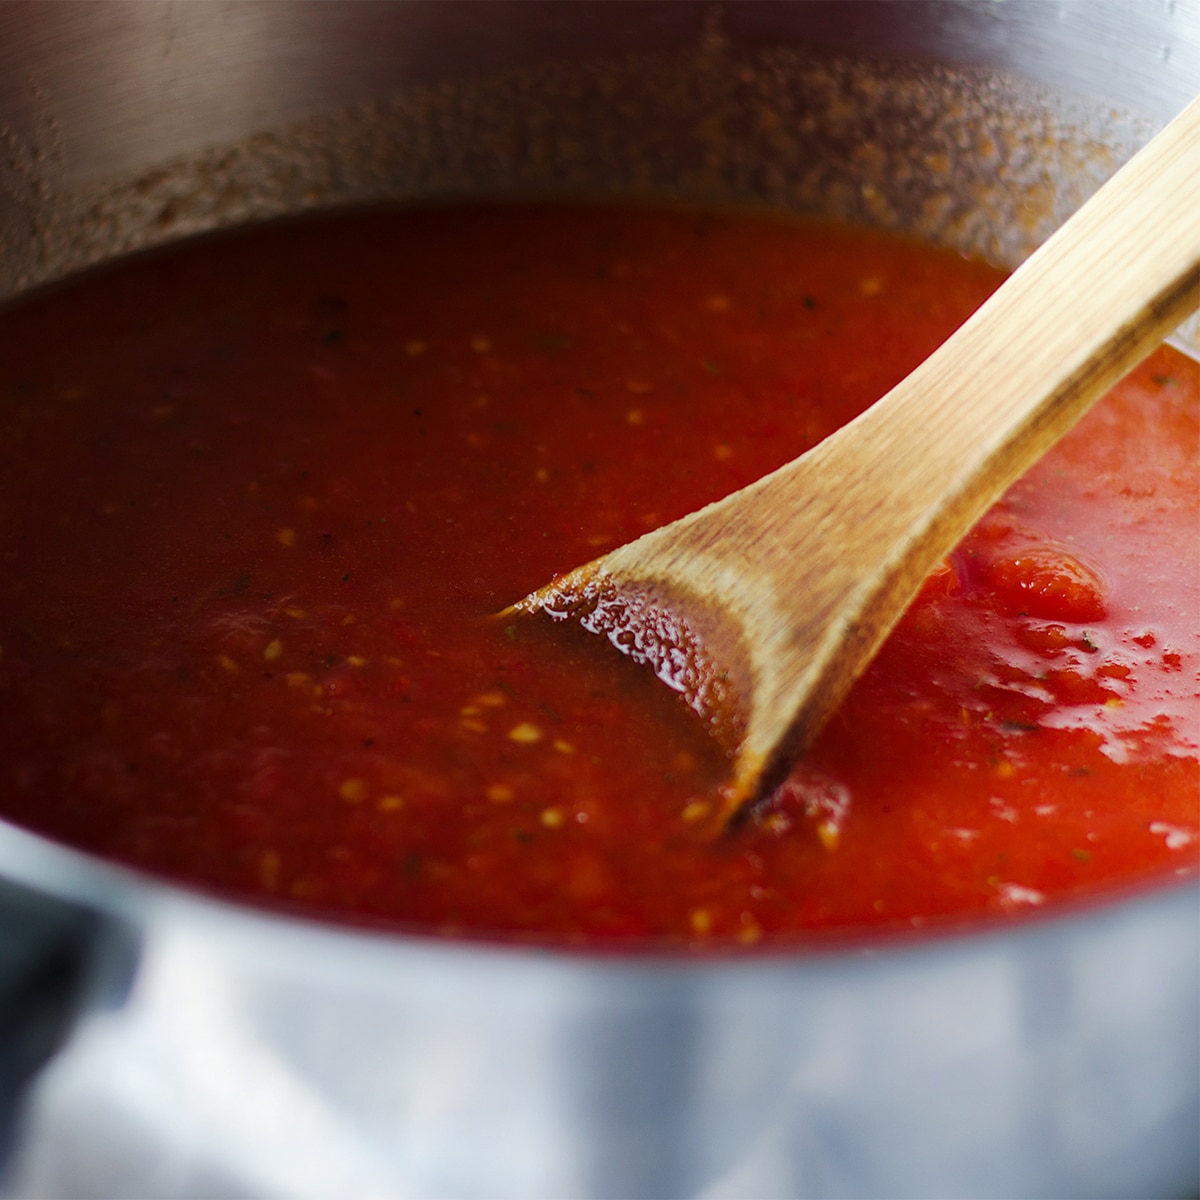 Using a wooden spoon to stir a pot of roasted tomato sauce while it simmers.